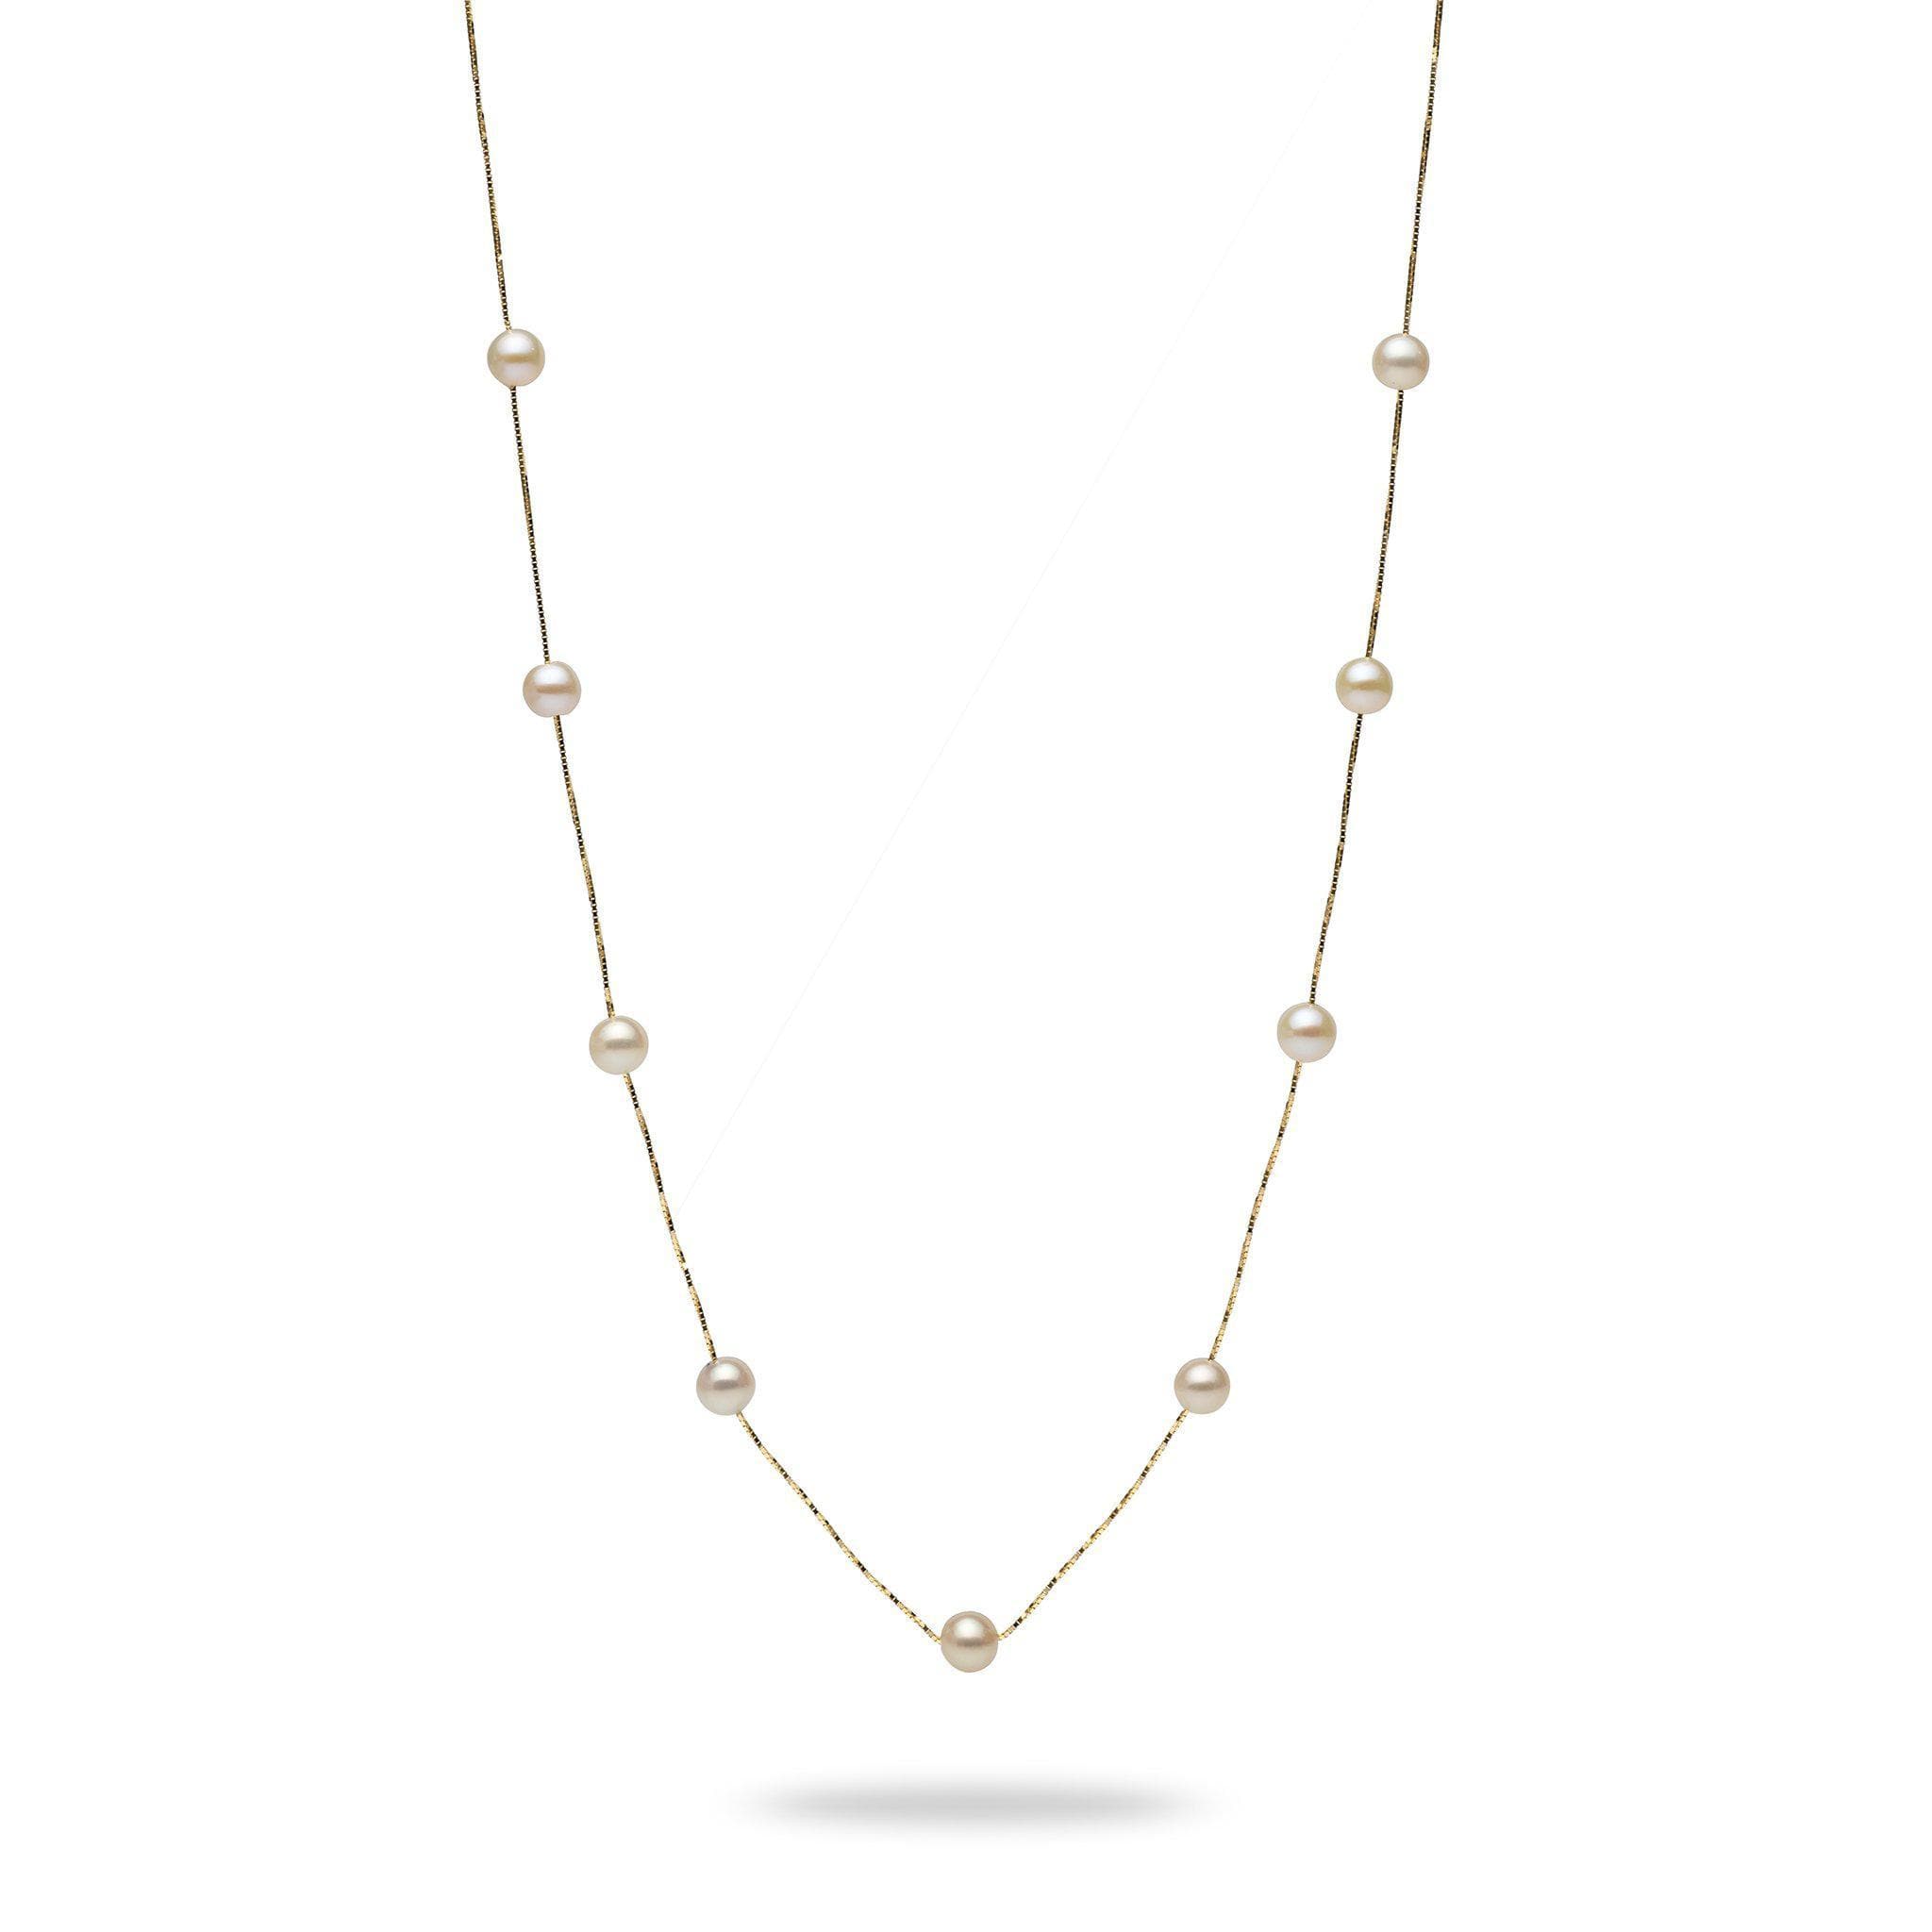 Shop Gold and Silver Hawaiian Necklaces Online - Maui Divers Jewelry ...